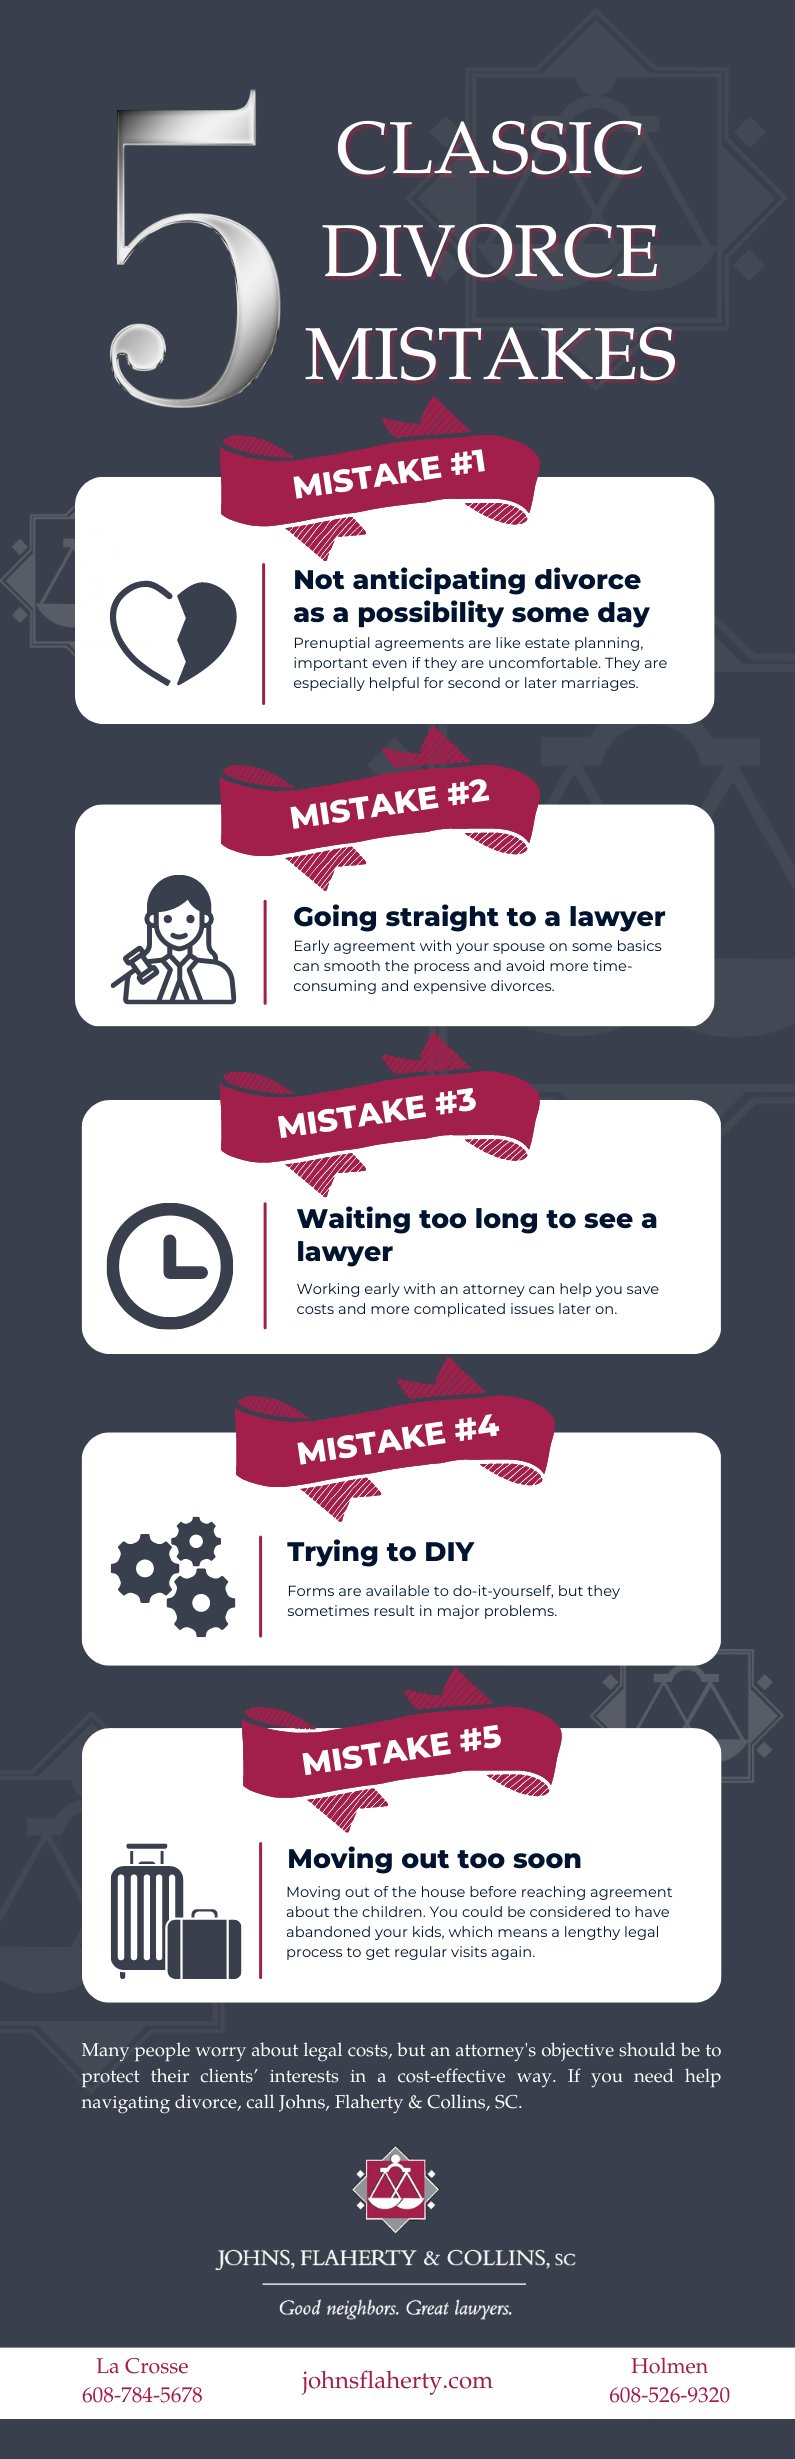 classic divorce mistakes infographic